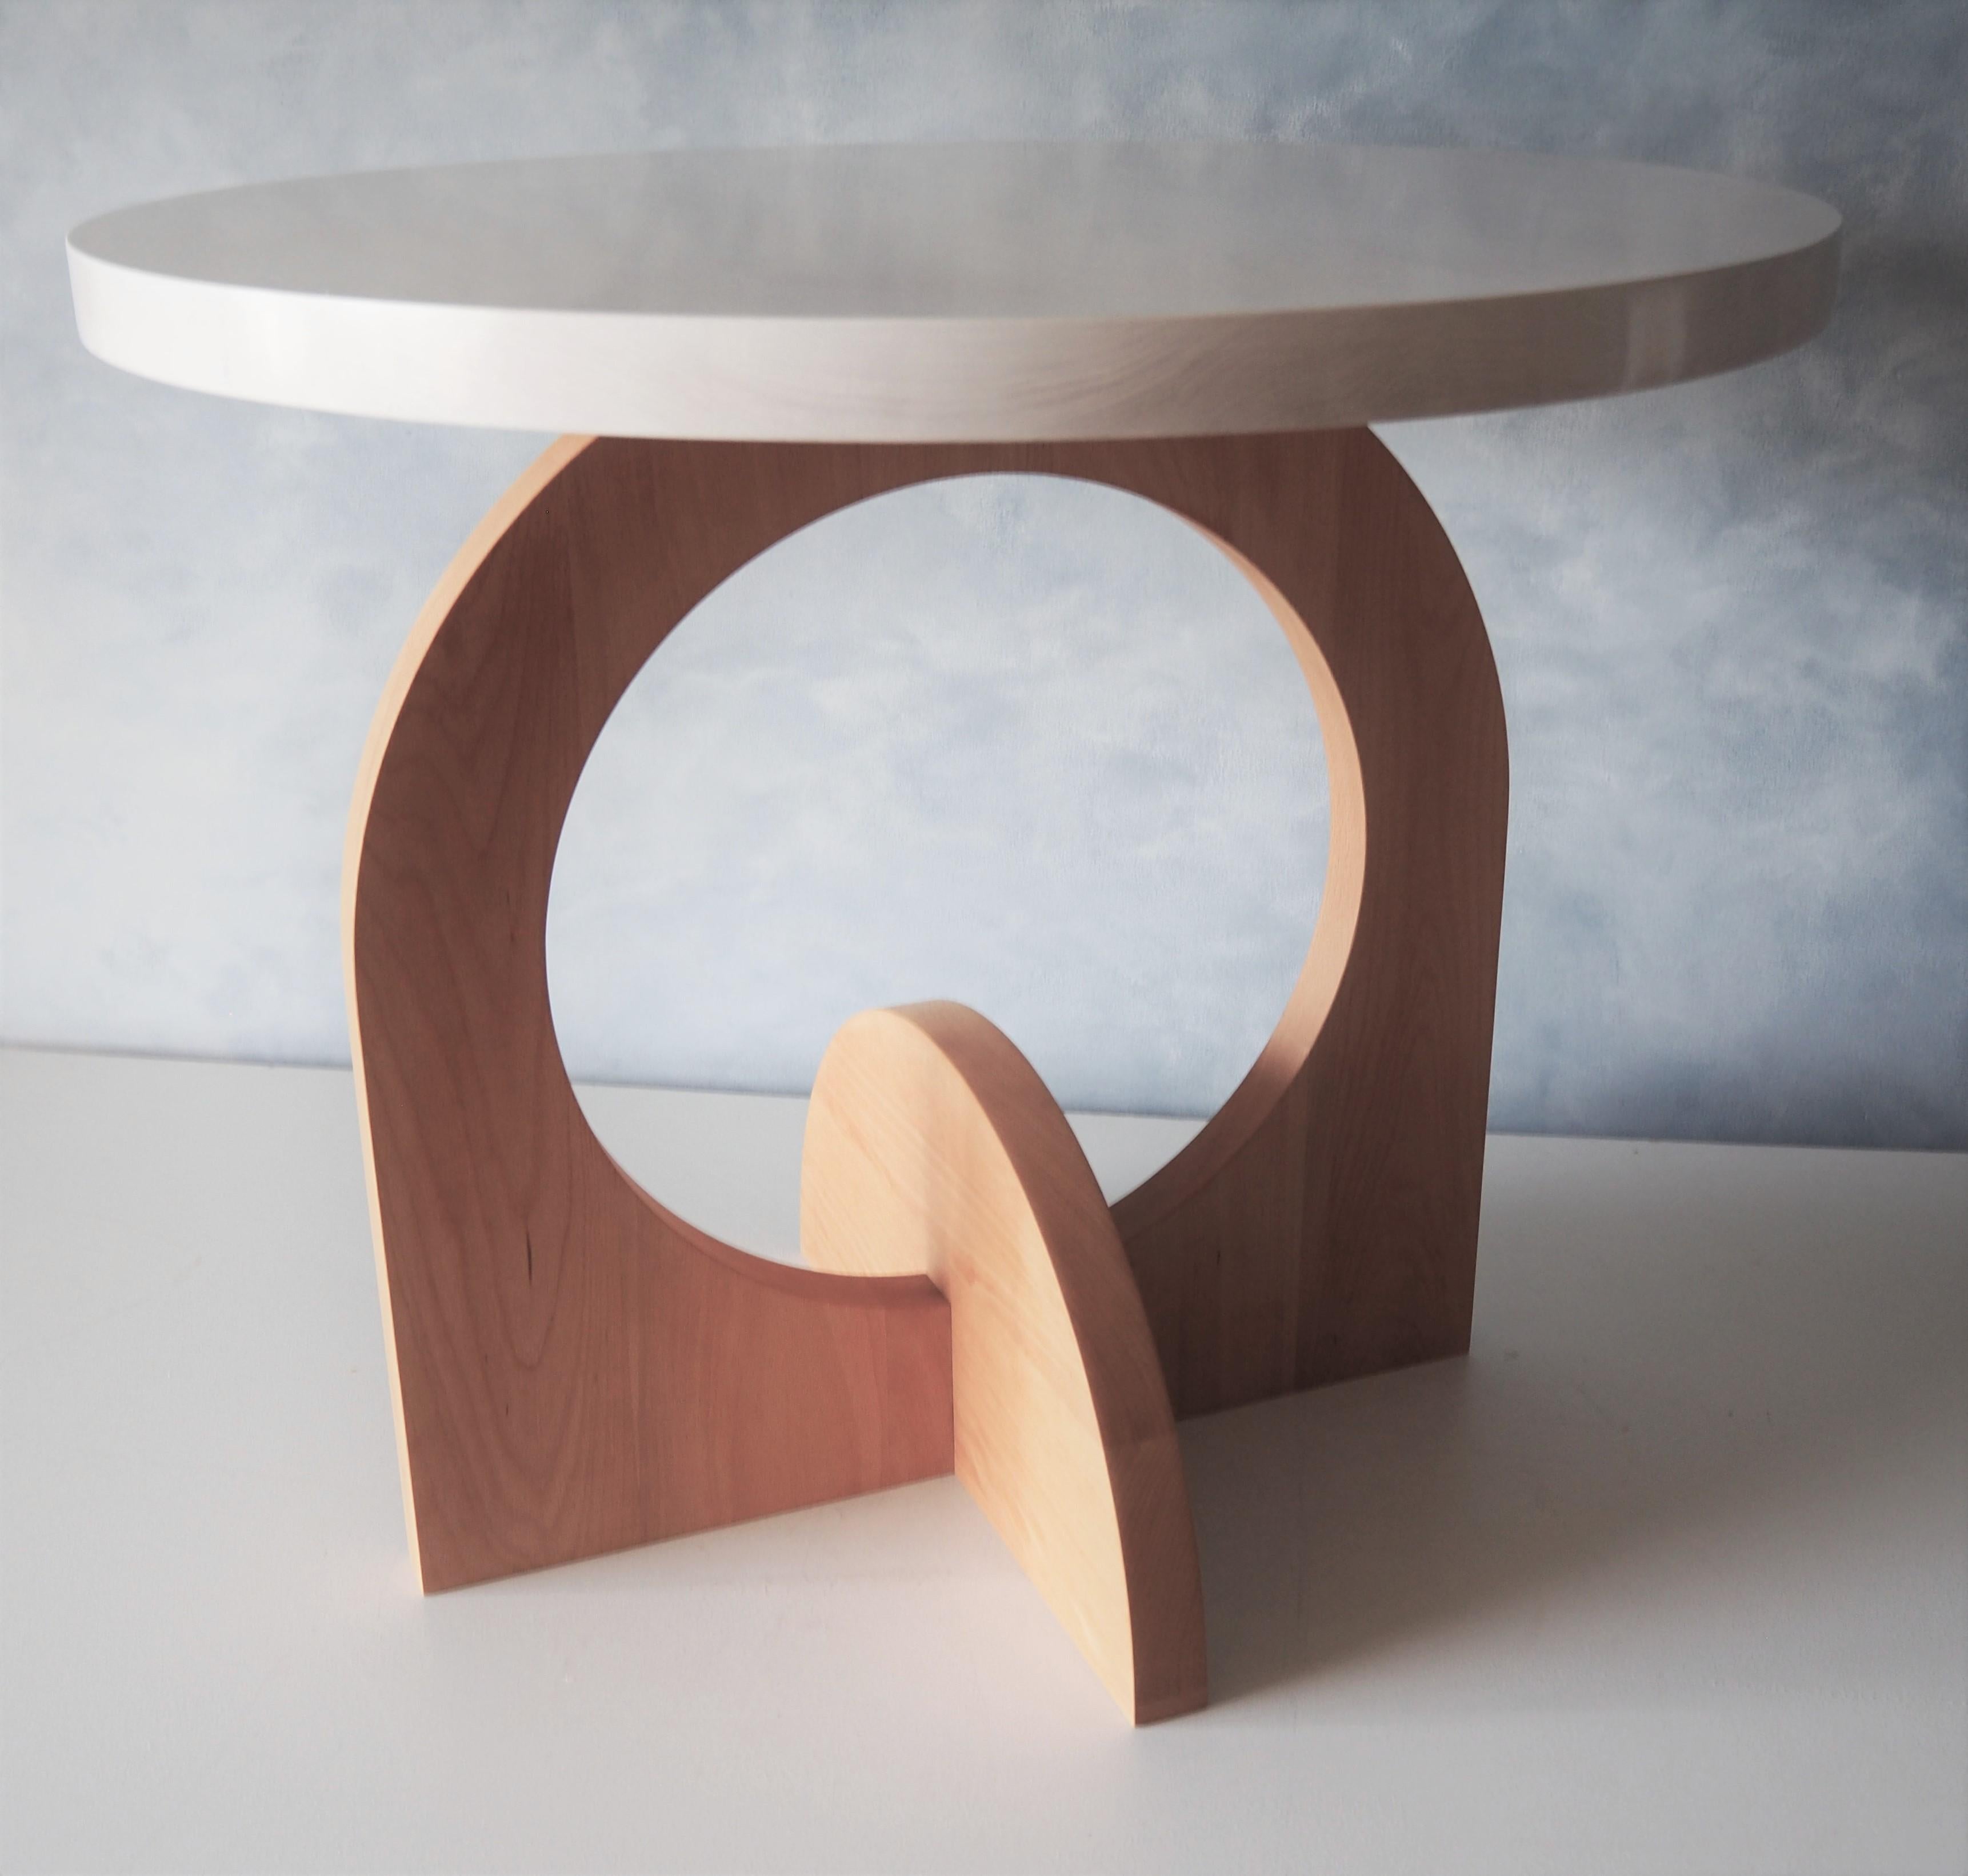 North American White and Beech Round Crescent Dining Table by MSJ Furniture Studio